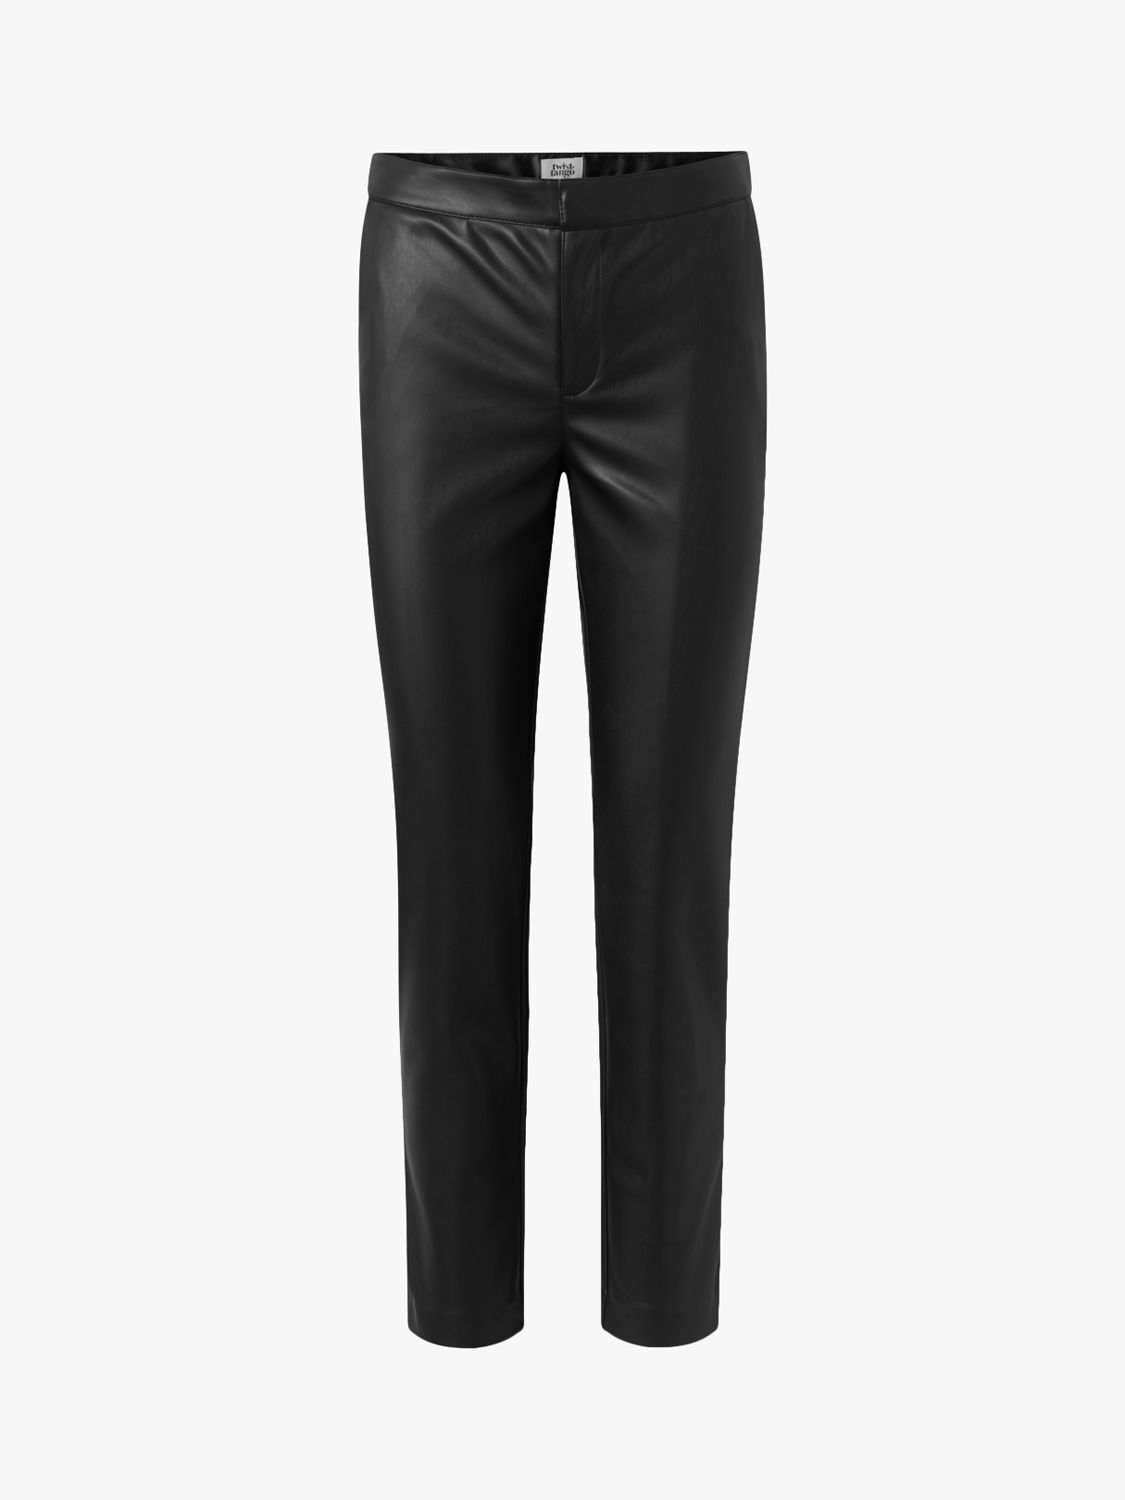 Twist & Tango Camilla Faux Leather Cropped Trousers, Black, 8